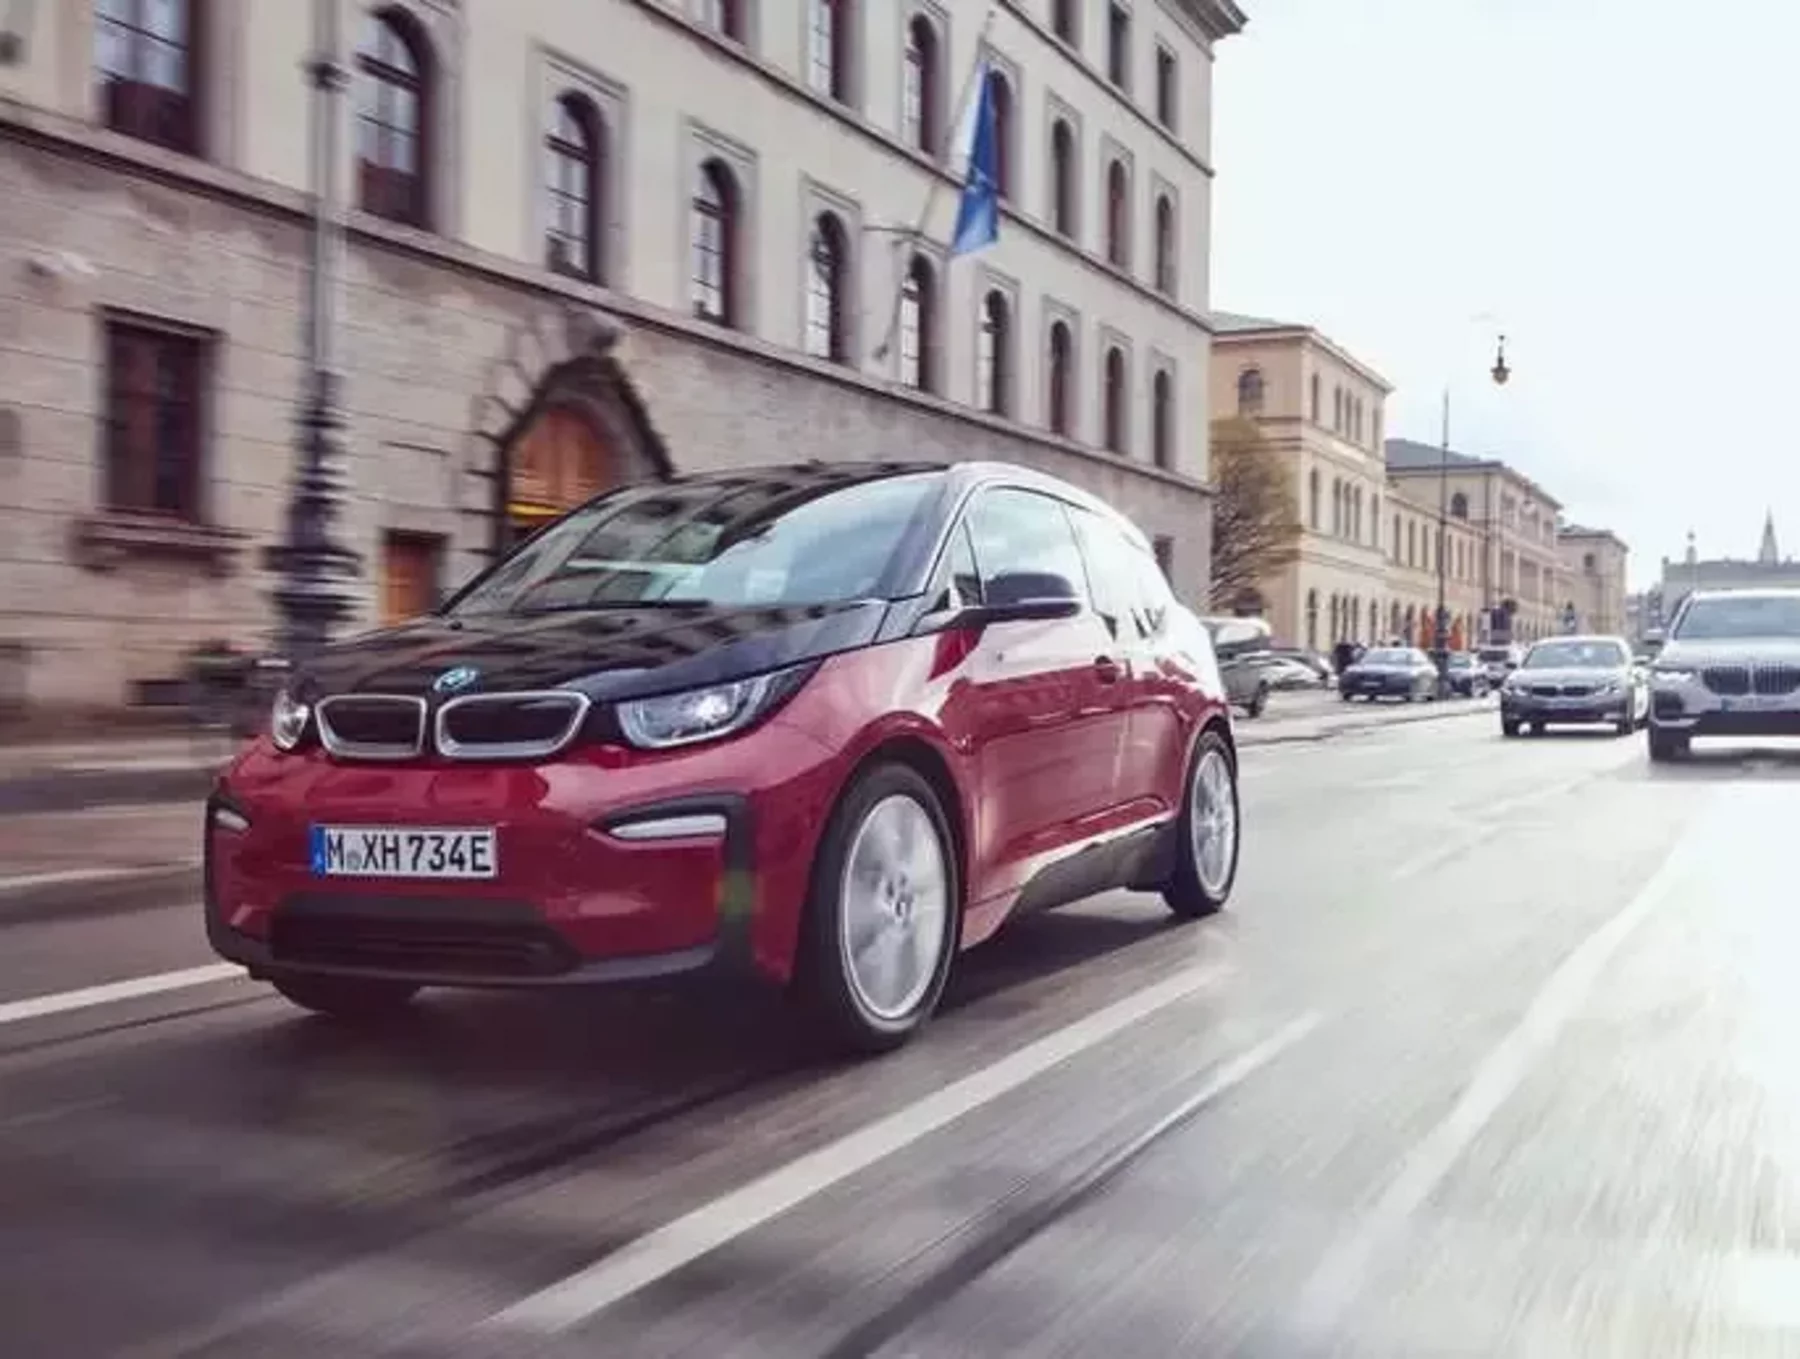 Government Raises Red Flags on BMW's Supply Chain Integrity